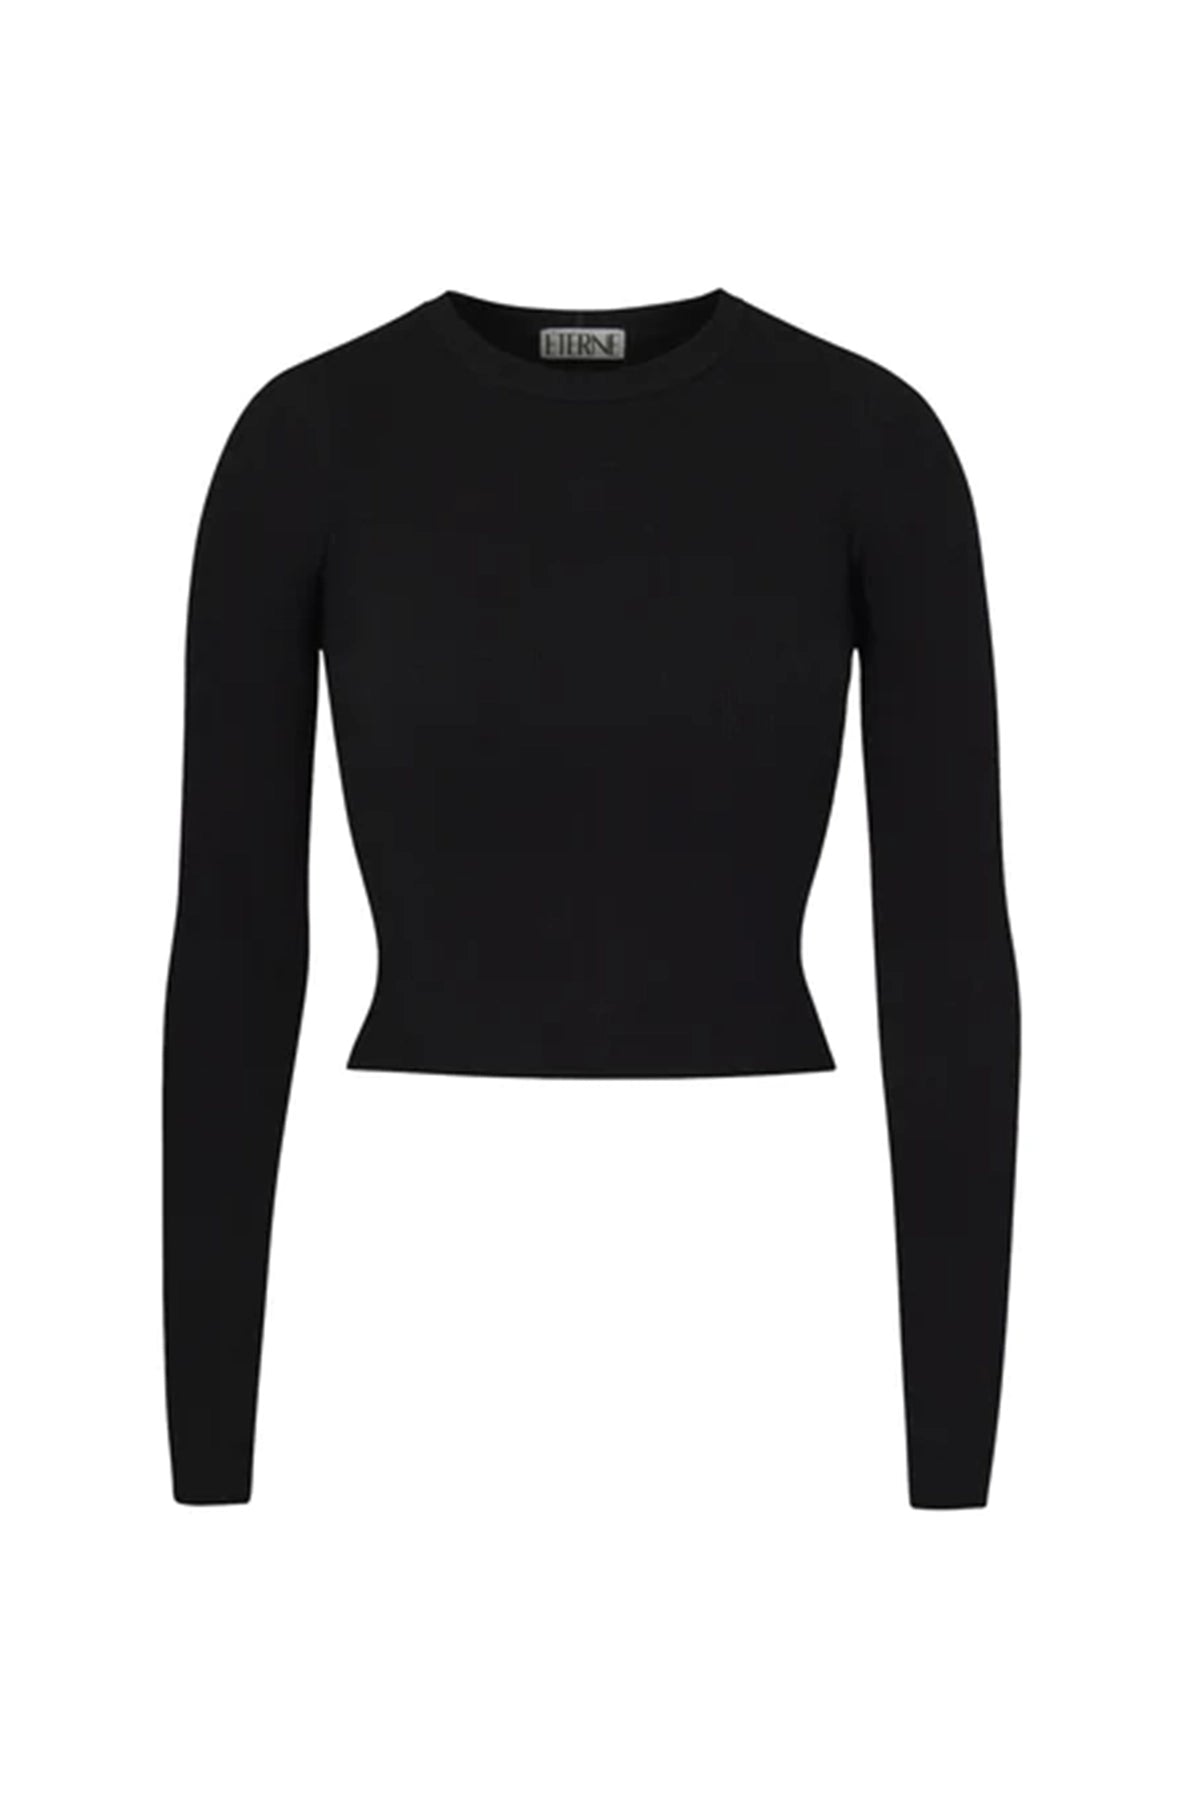 Éterne Cropped Long Sleeve Fitted Top